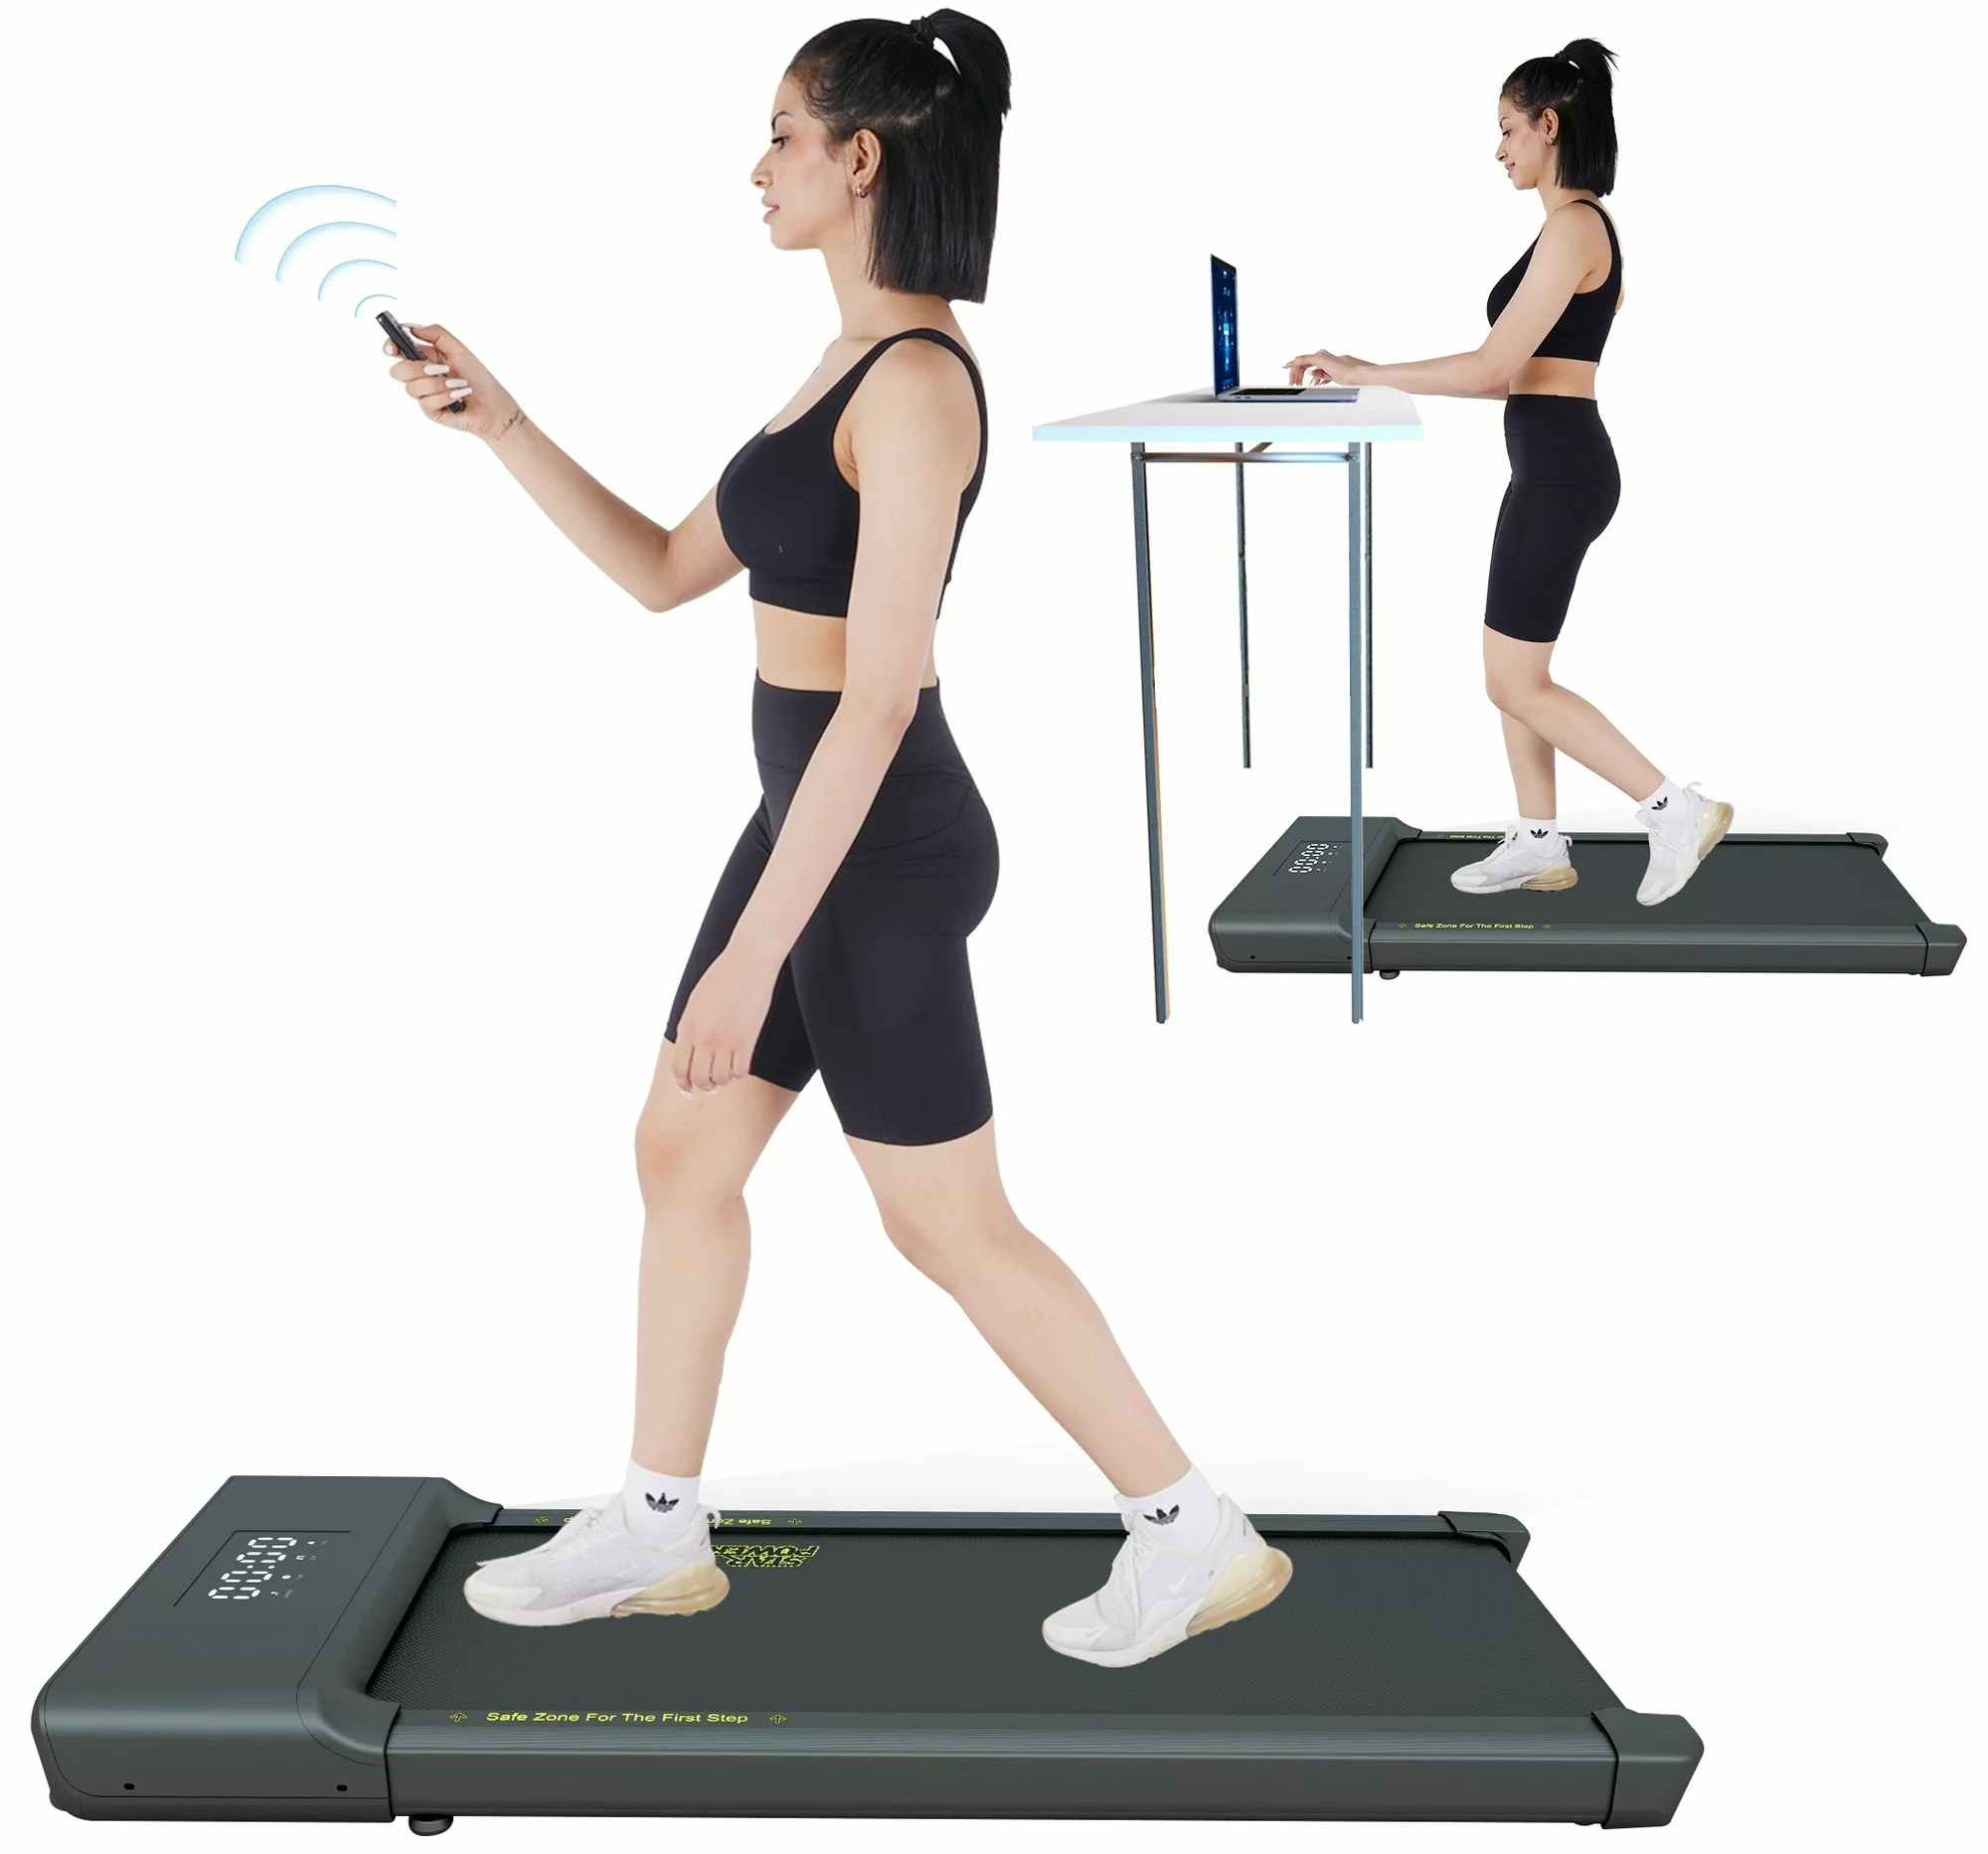 A person using a SSPHPPLIE Under-Desk Treadmill on a white background